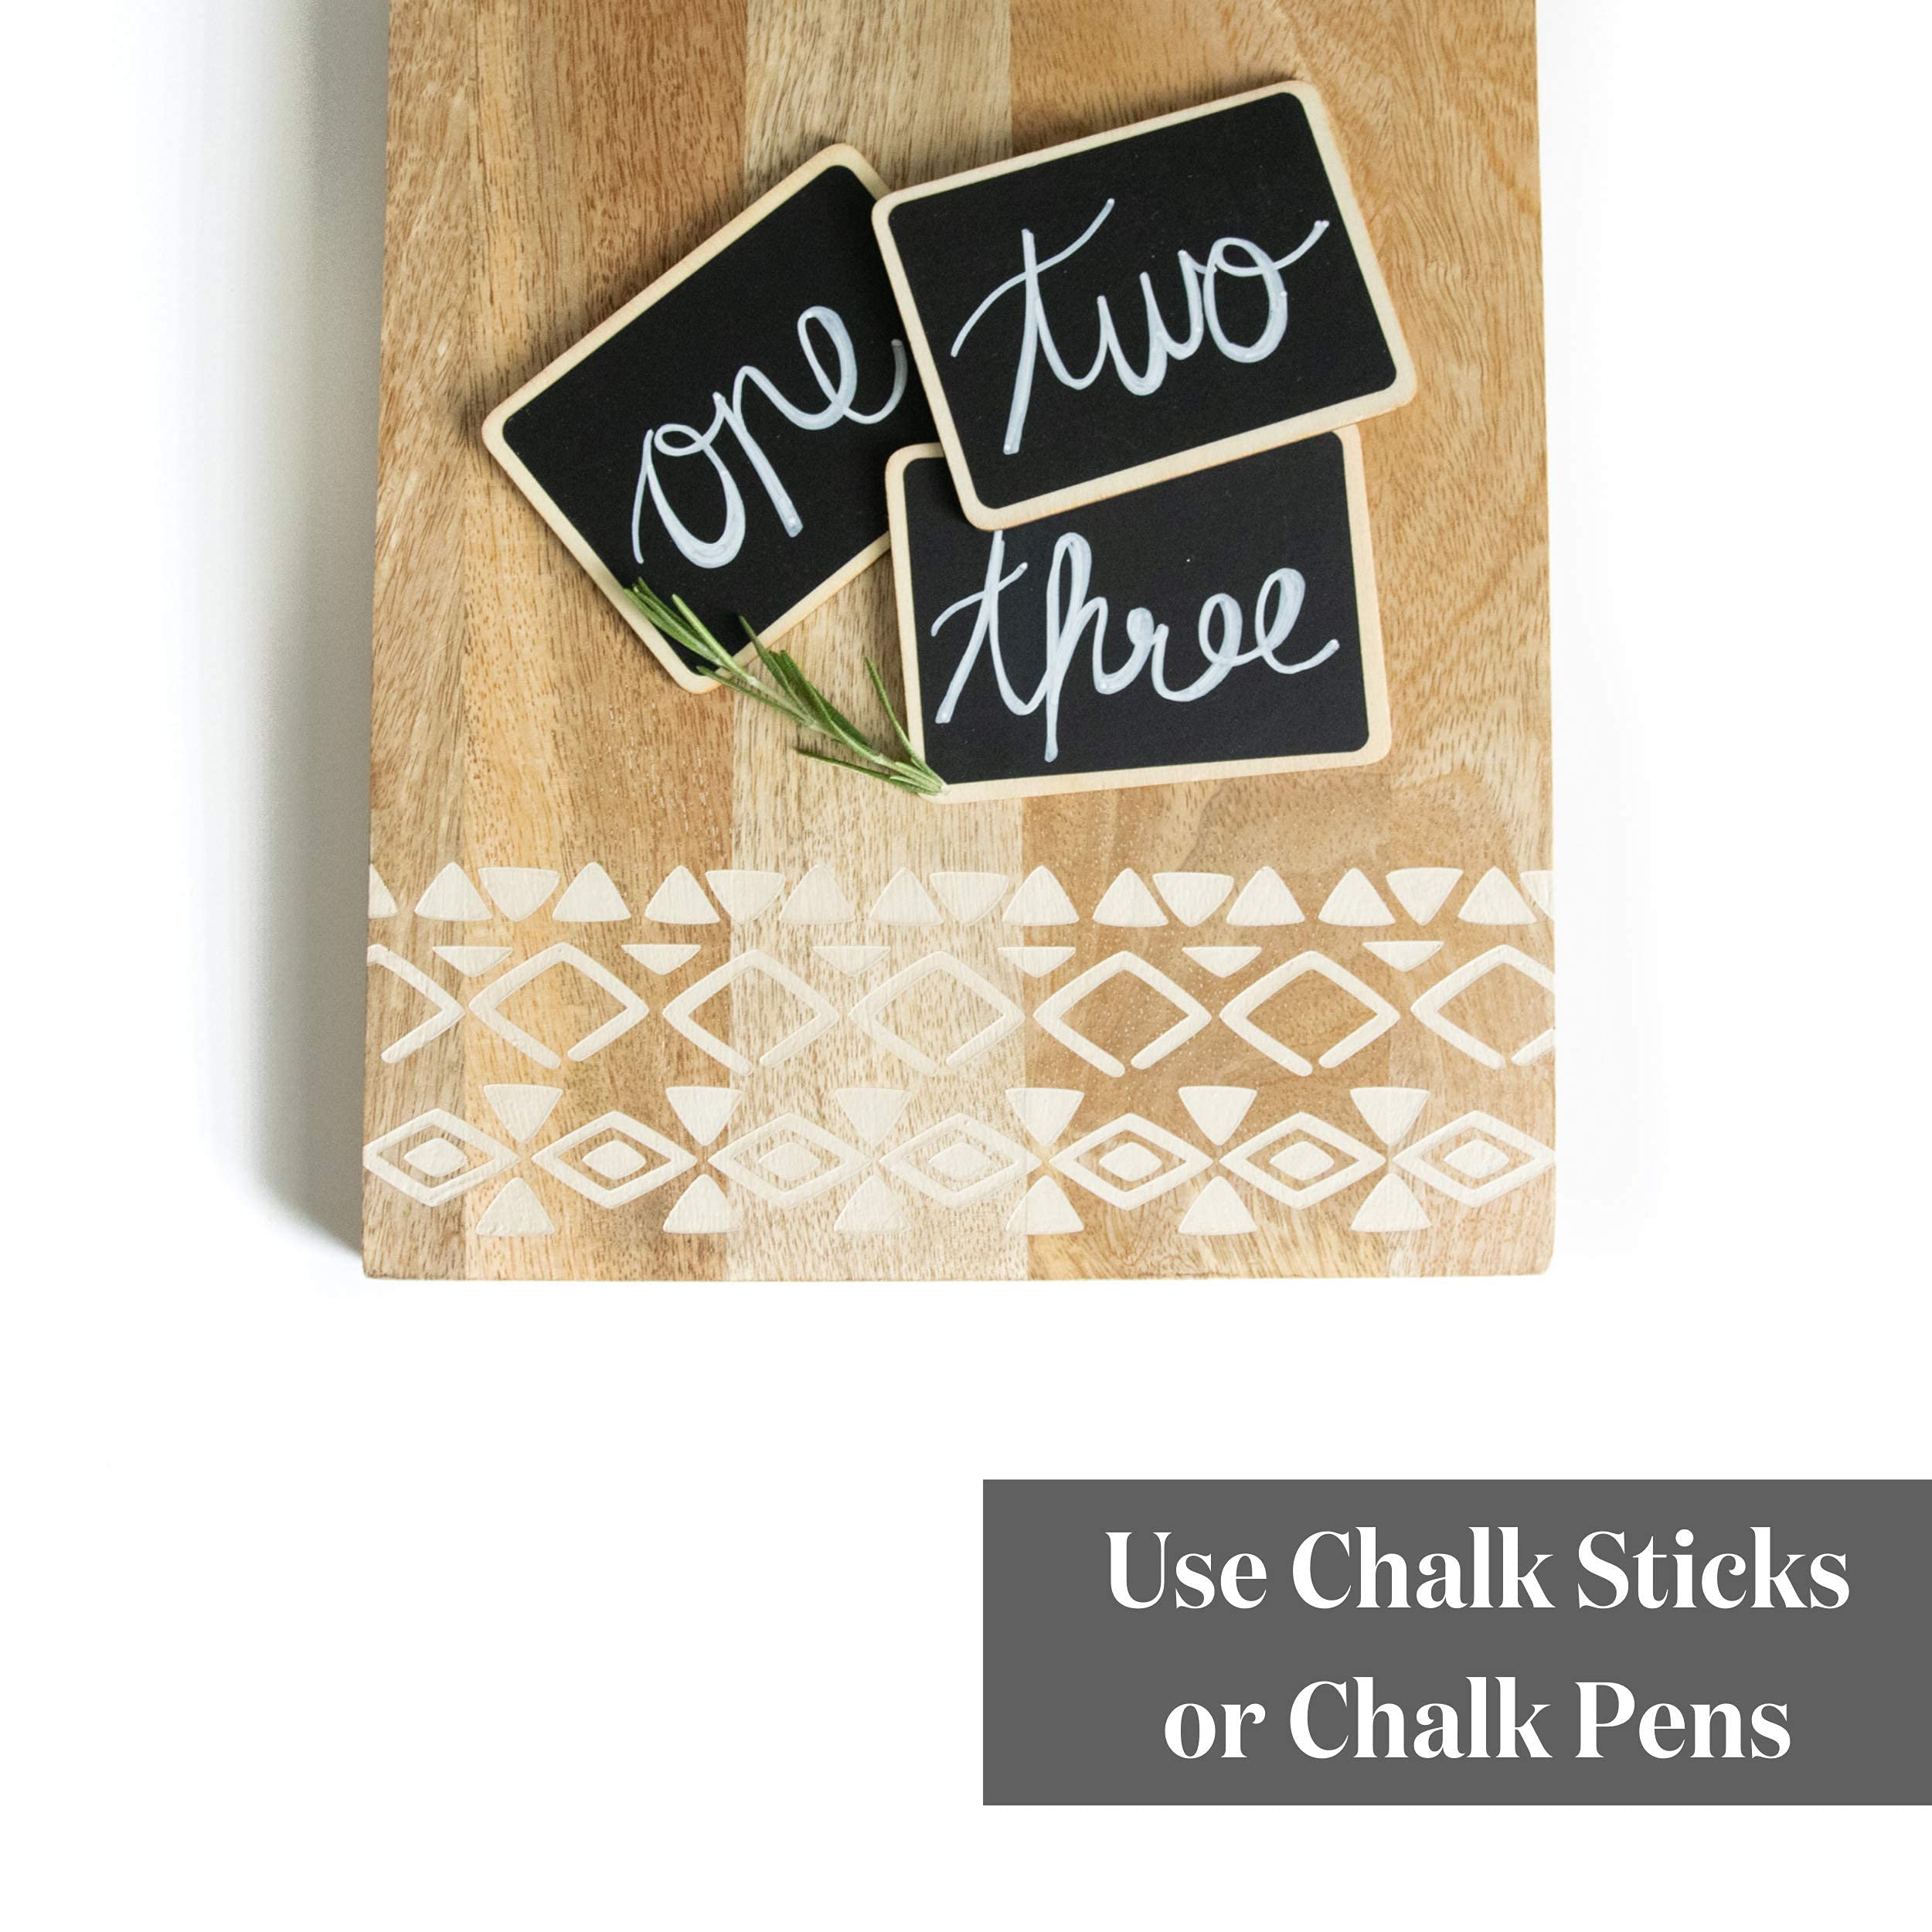 Mini Chalkboard Signs for Food - 18 Small Chalk Signs Including 3 White Chalk Sticks - Food Signs for Party - Little Chalkboards - Party Food Labels Buffet Cheese Signs Candy Table Party Supplies